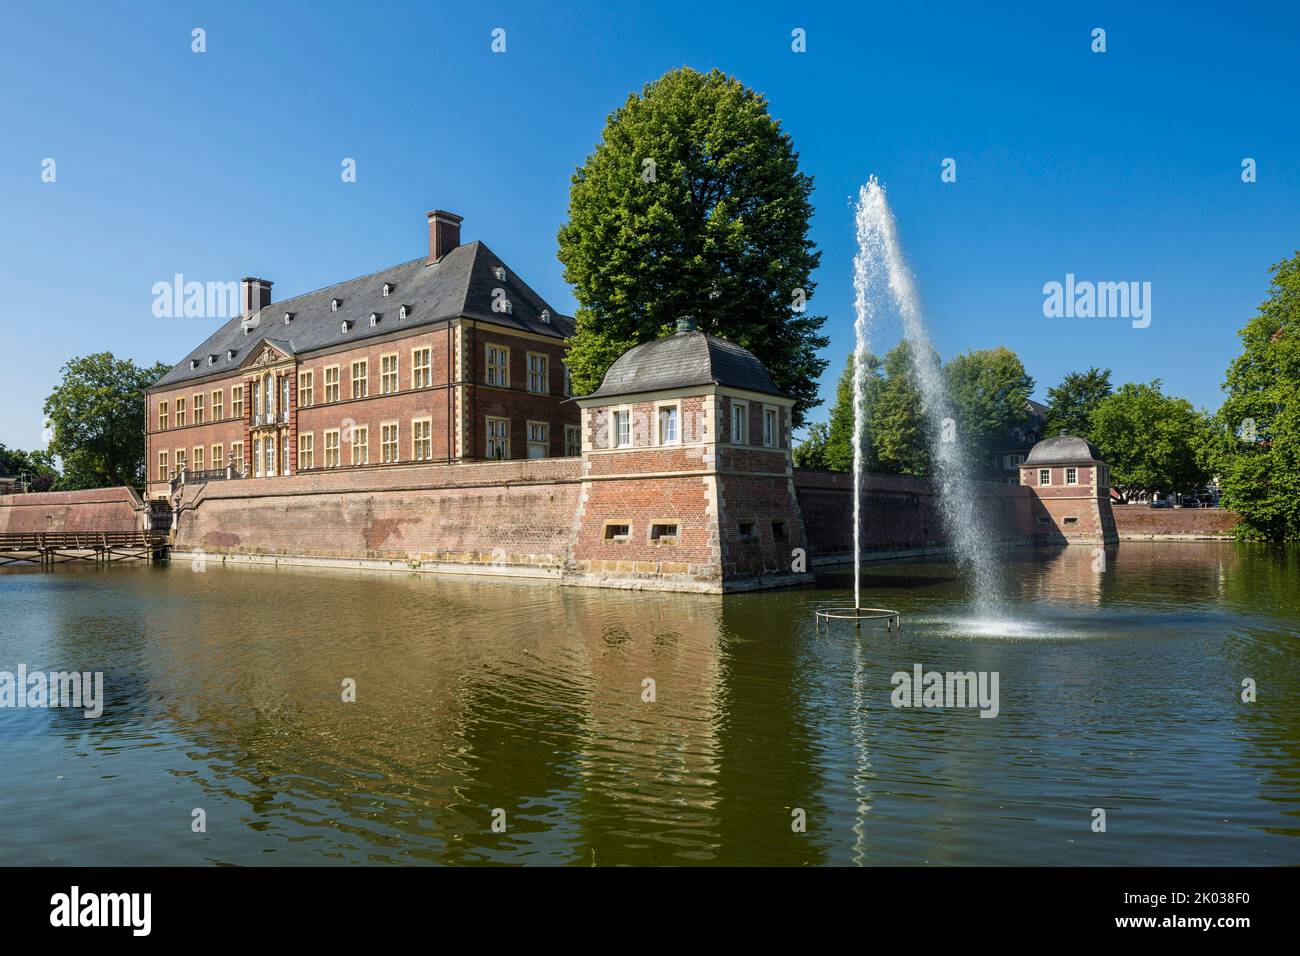 Germany, Ahaus, Westmuensterland, Muensterland, Westphalia, North Rhine-Westphalia, Ahaus Castle, former residence castle, today seat Technical Academy Ahaus, moated castle, baroque castle, water fountain Stock Photo